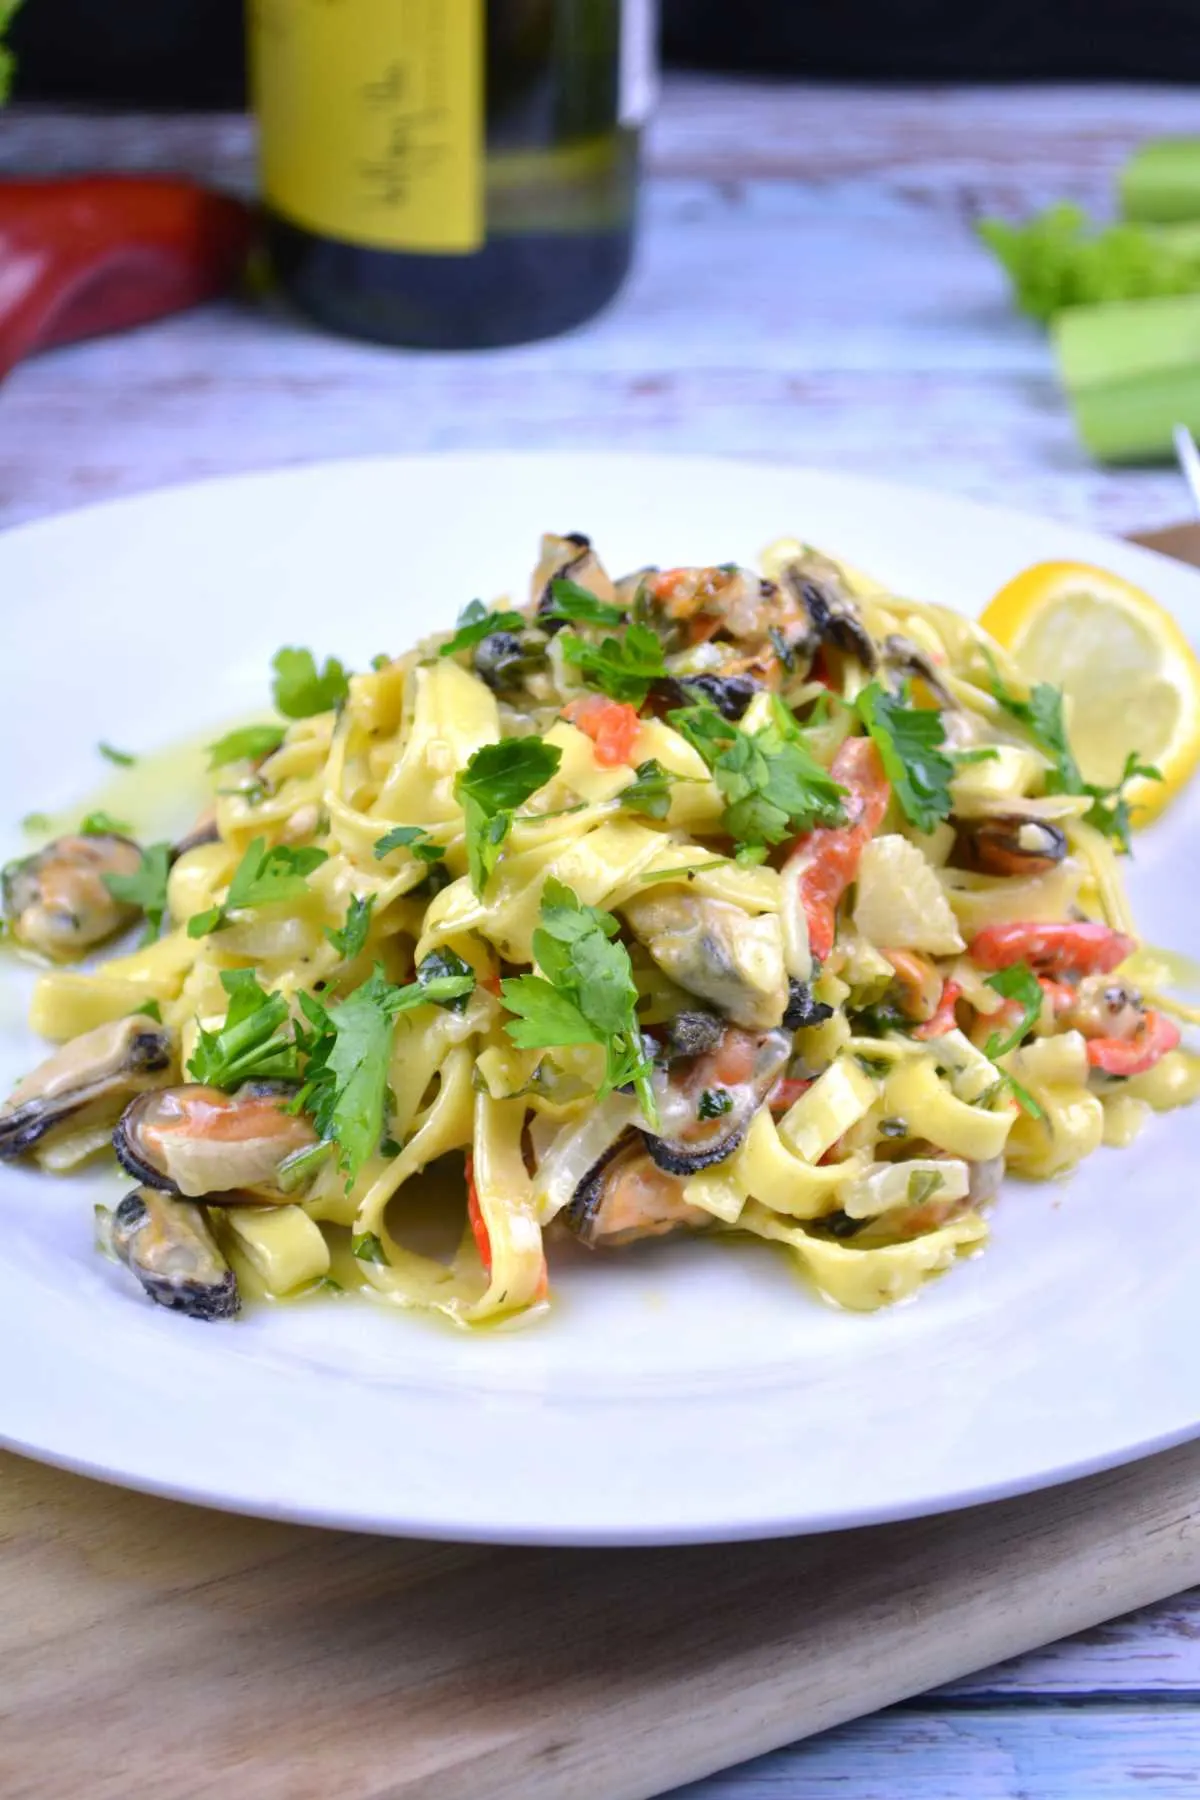 Frozen Mussels Recipe-Shelled Mussels With Tagliatelle Pasta in Cream and White Wine Sauce Served on Plate